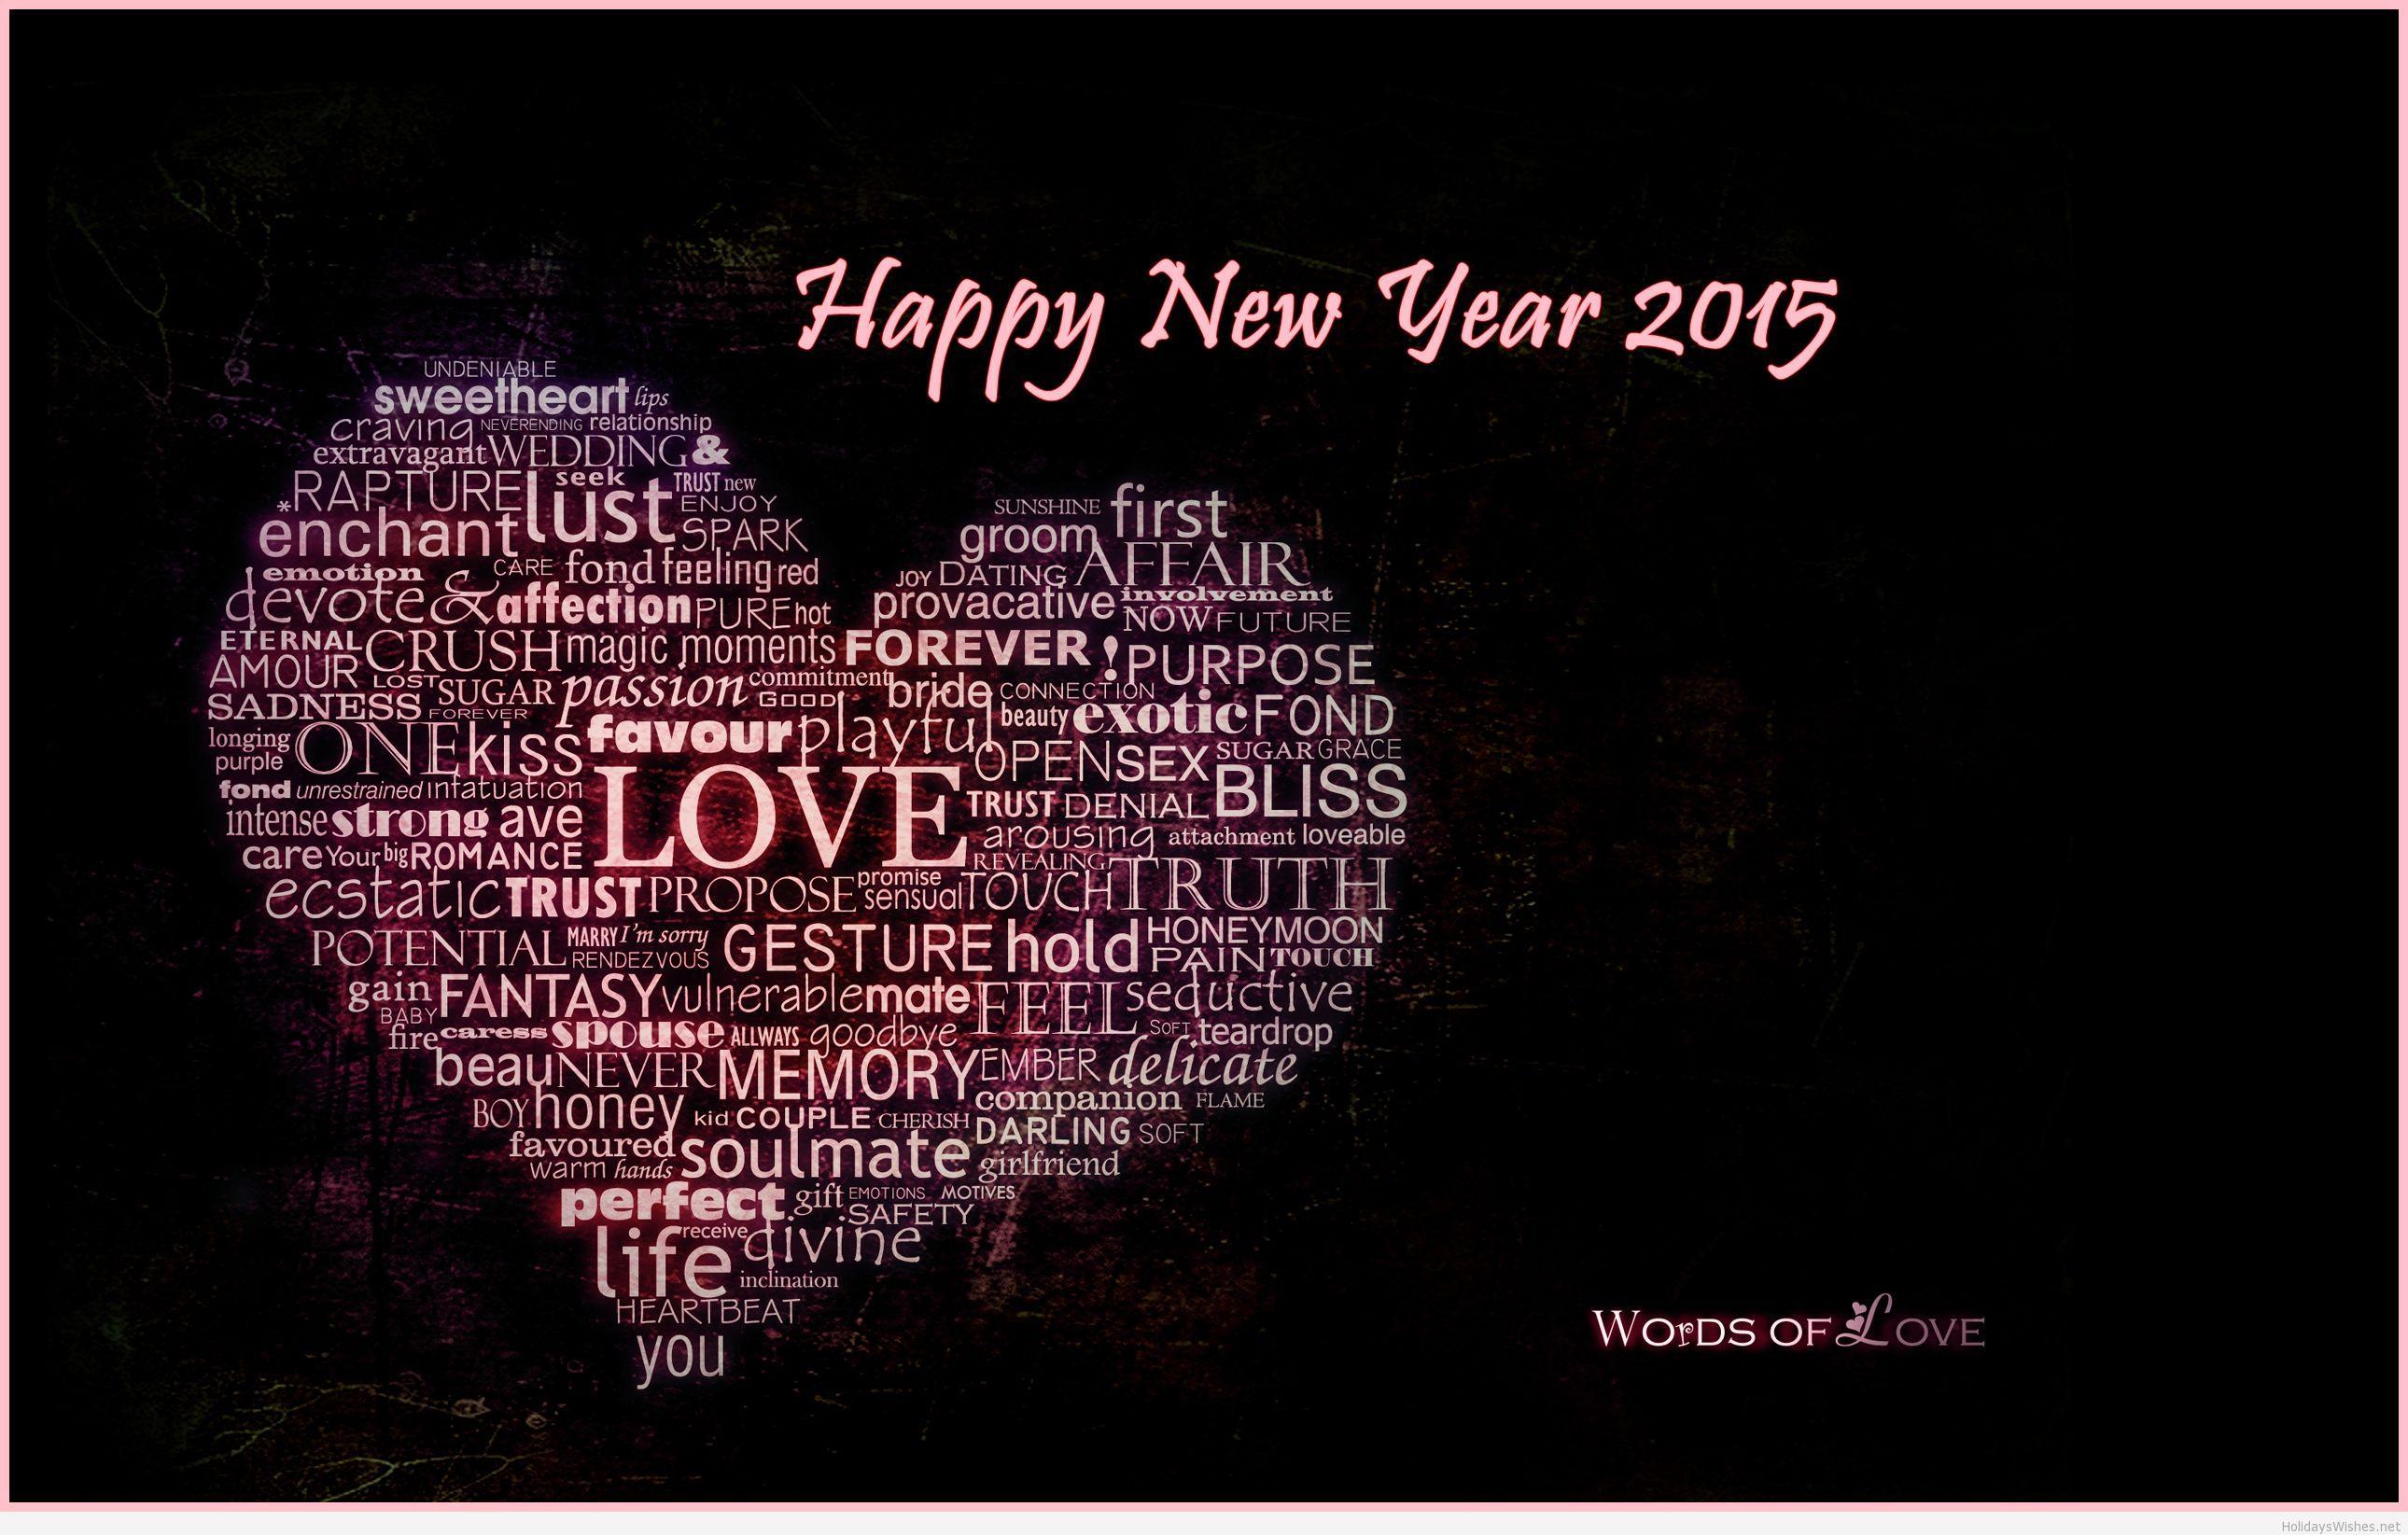 New Year 2015 Wishes 5. Quotesvsfun